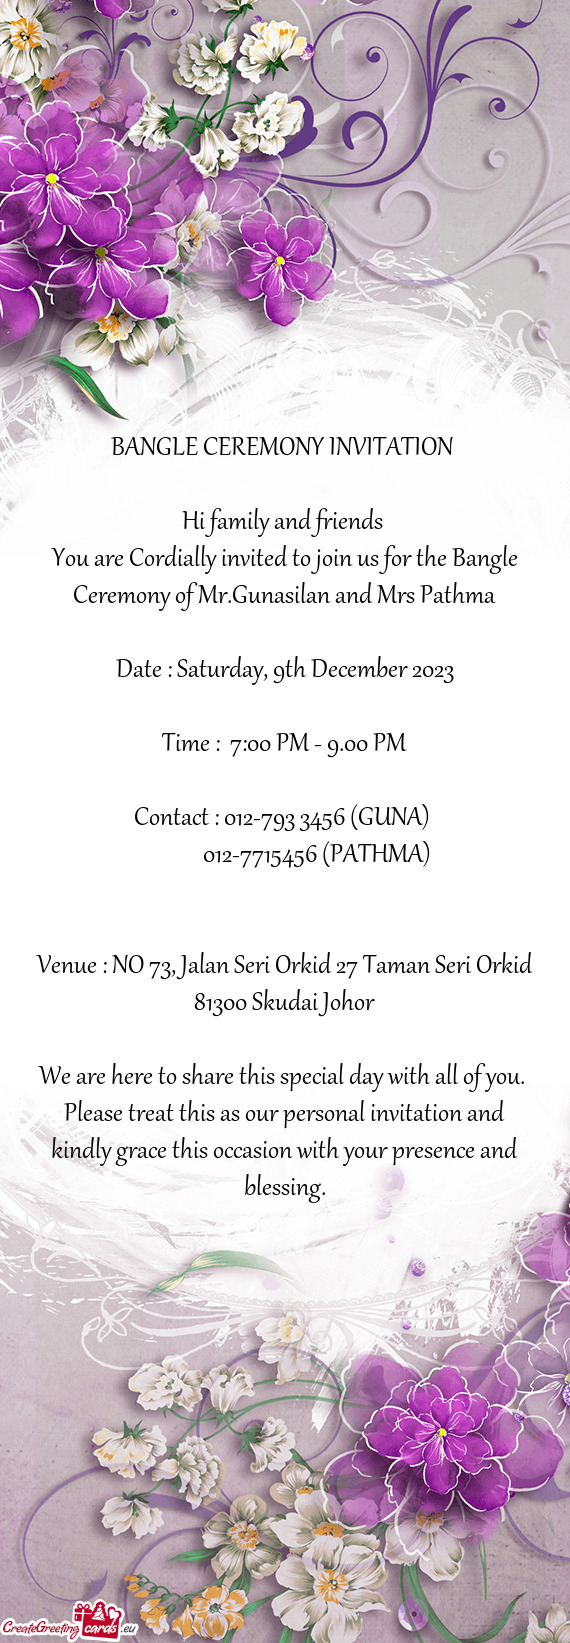 You are Cordially invited to join us for the Bangle Ceremony of Mr.Gunasilan and Mrs Pathma